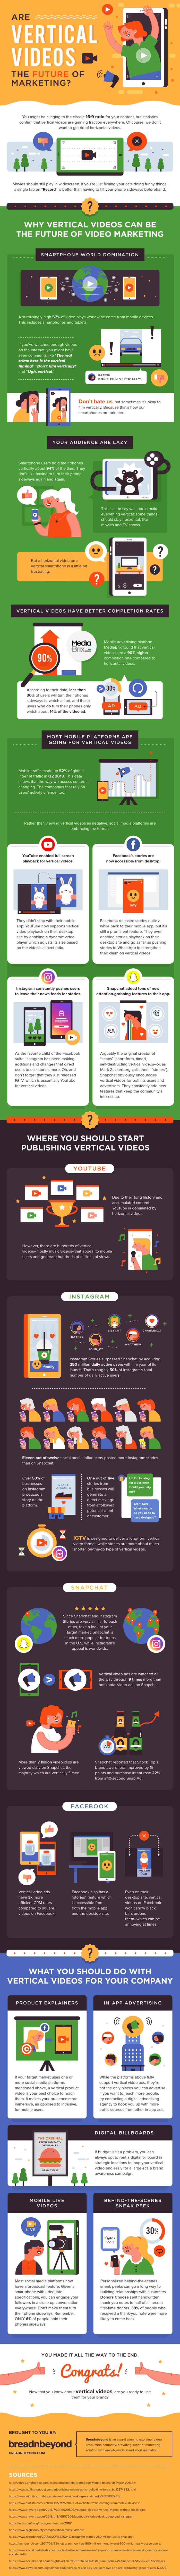 The ultimate guide to vertical videos for marketing